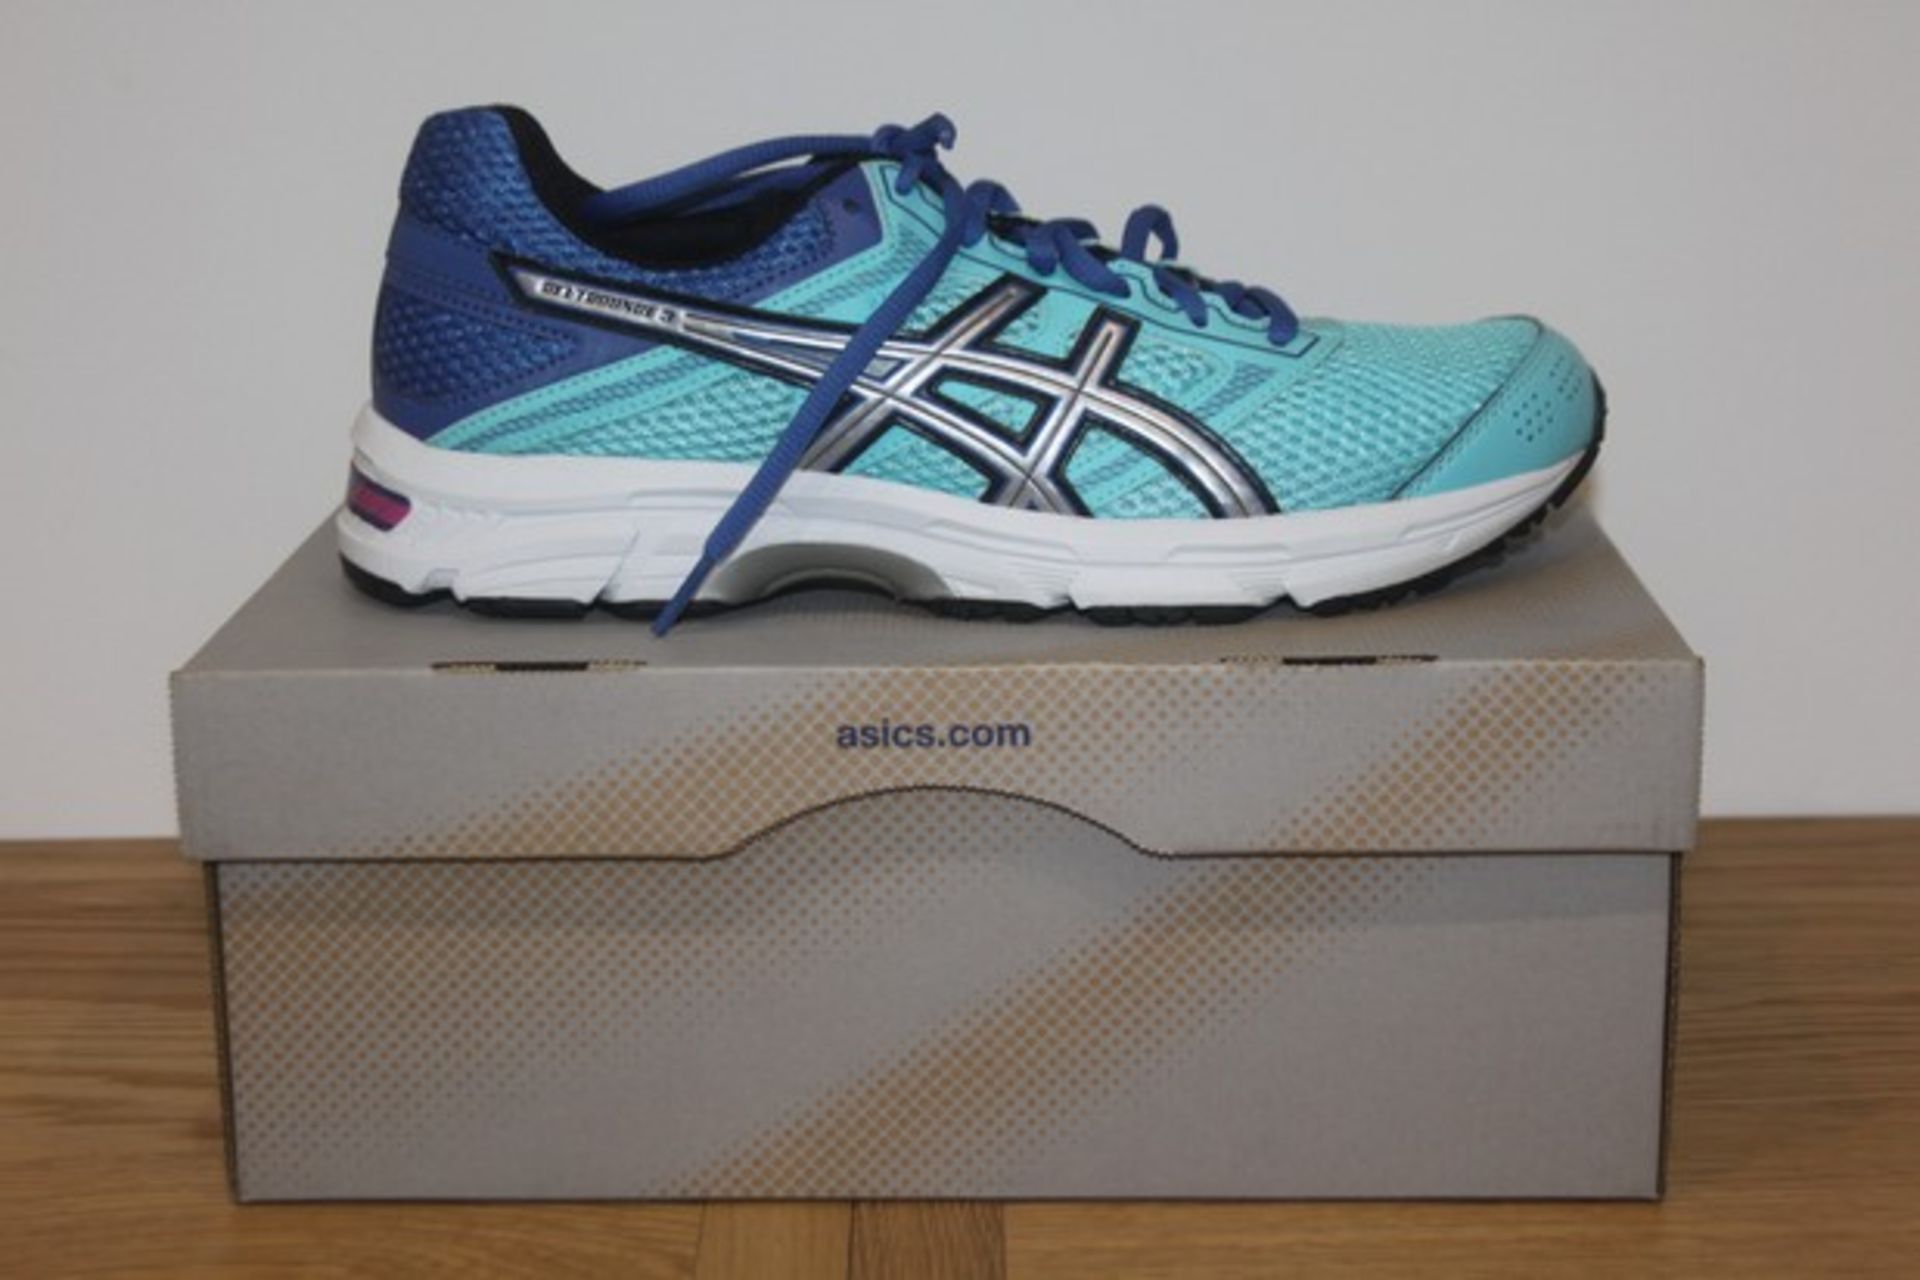 BOXED BRAND NEW ASICS SHOES SIZE US10 RRP £85 (DSSALVAGE)